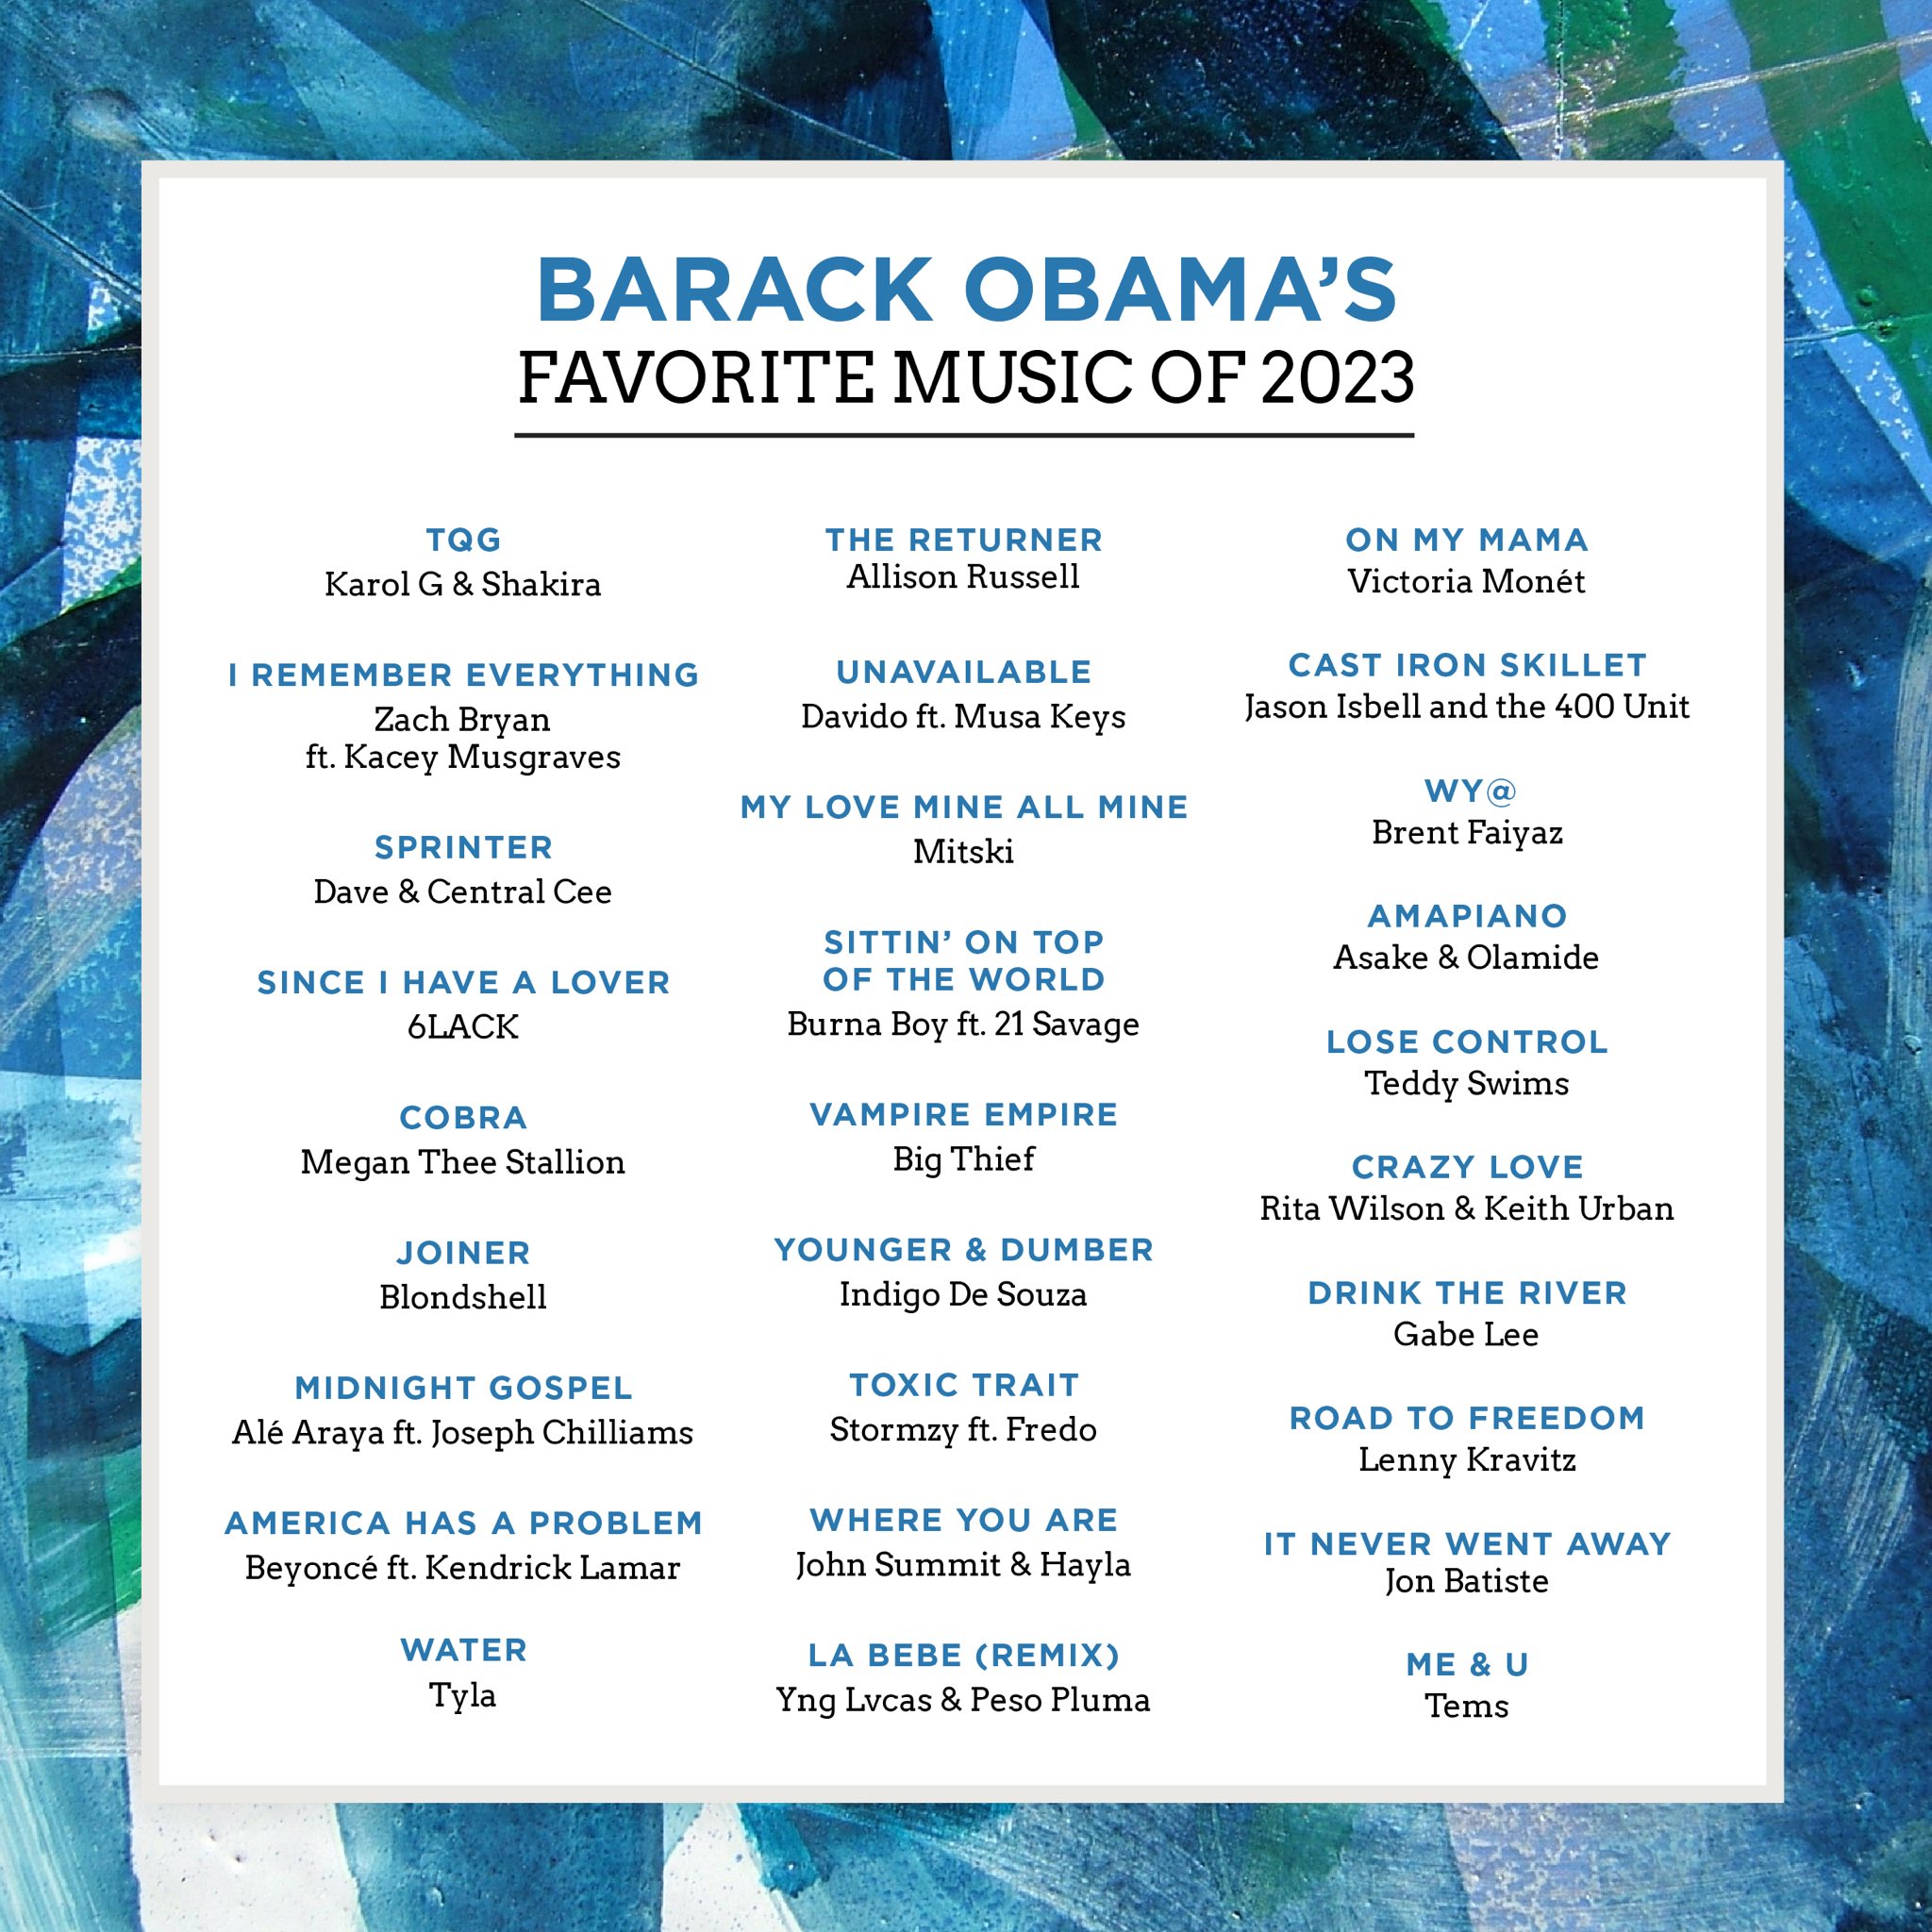 Barack Obama on X: Here are some of my favorite songs from this